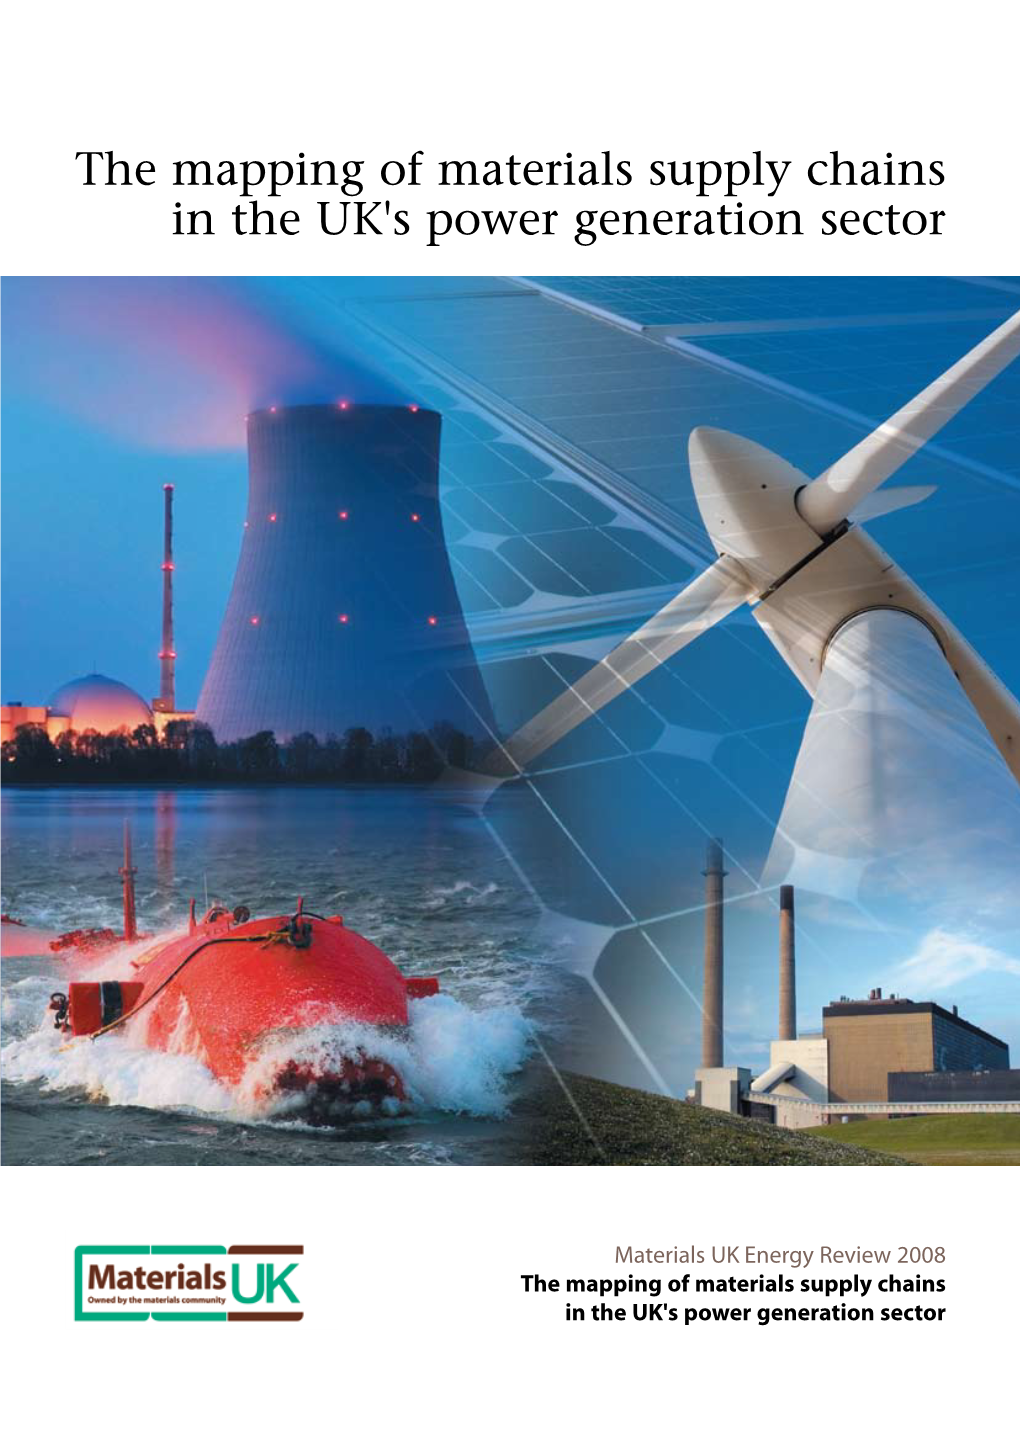 The Mapping of Materials Supply Chains in the UK's Power Generation Sector